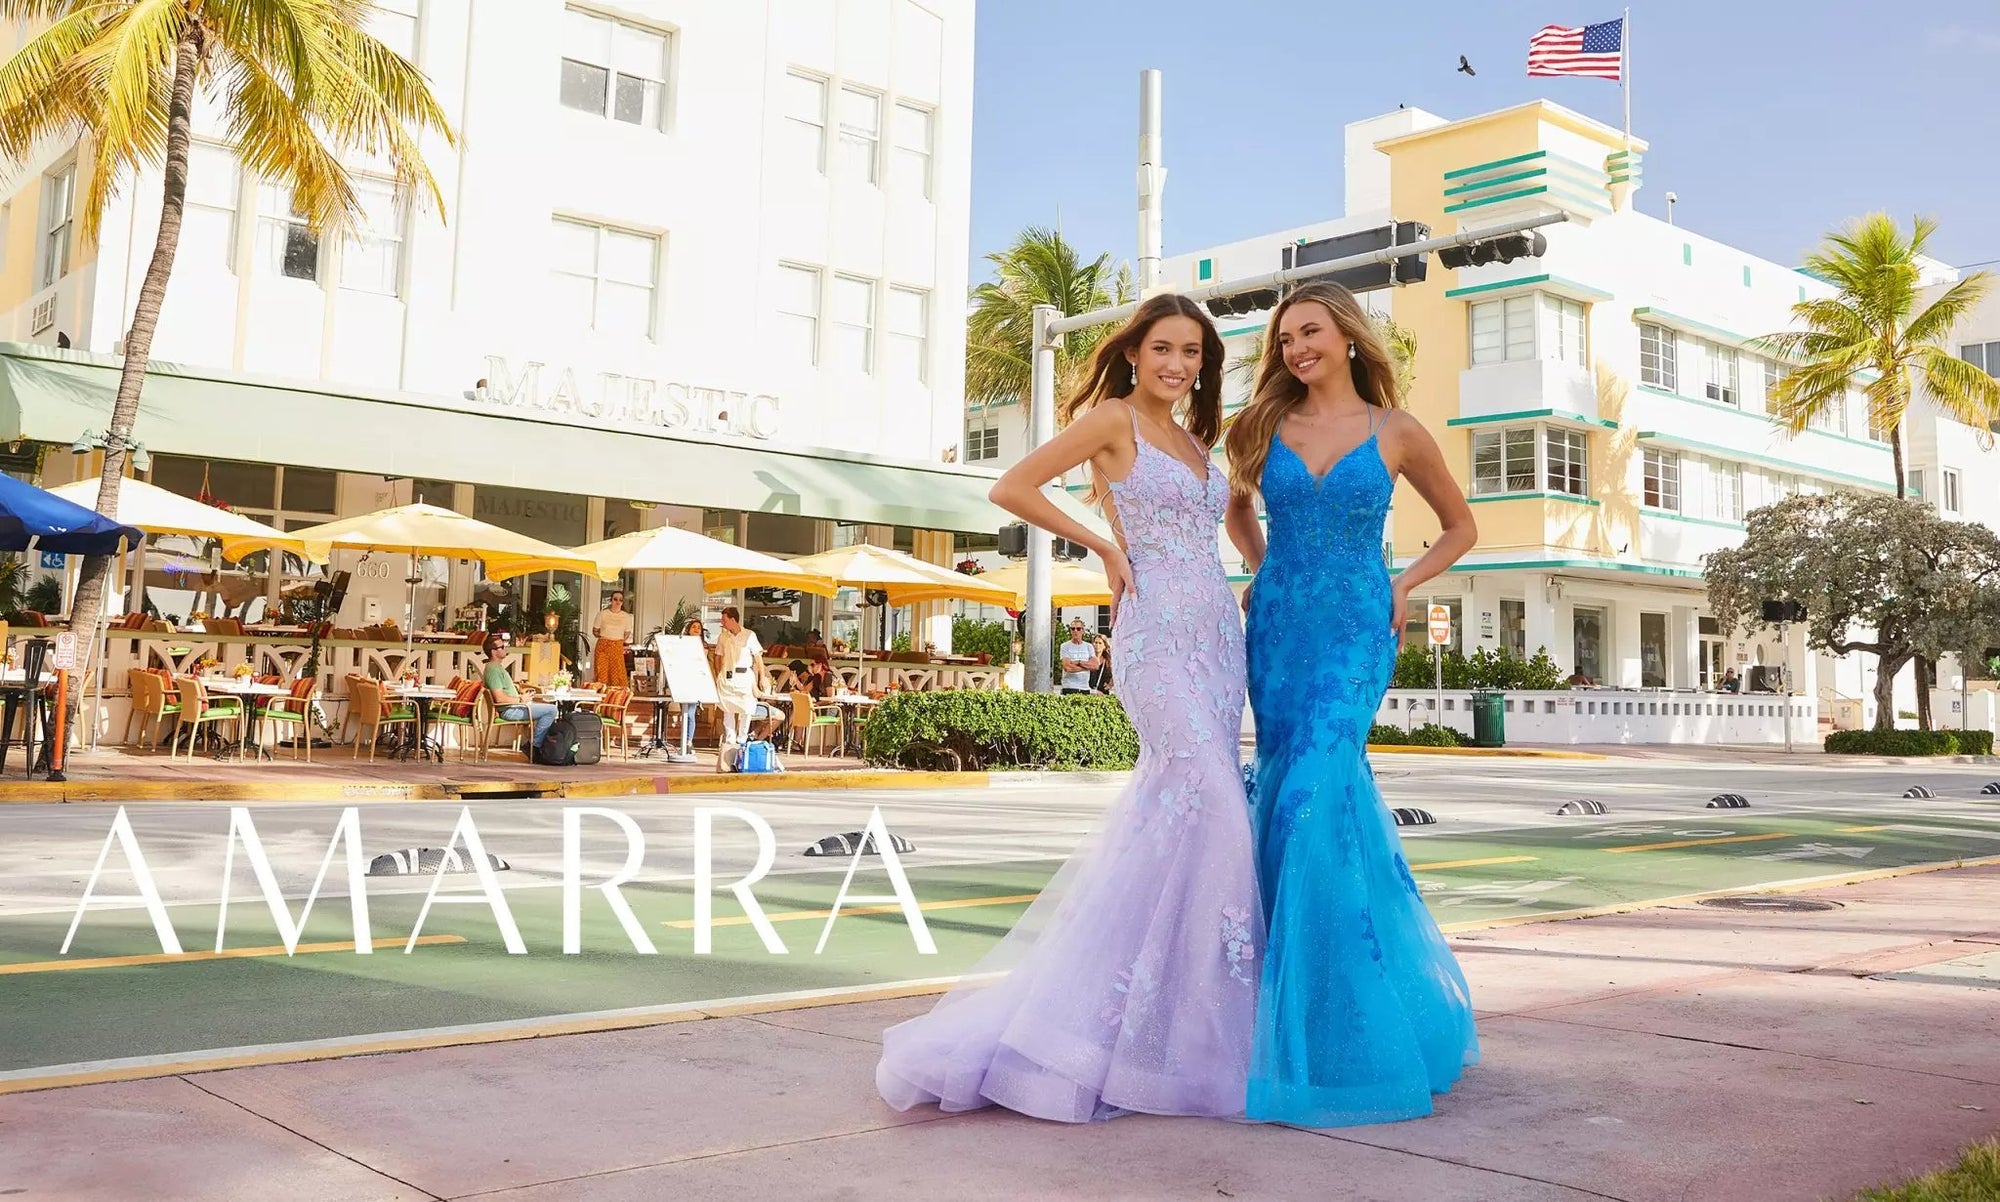 5 Latest Prom Dress Trends You Need To Know About